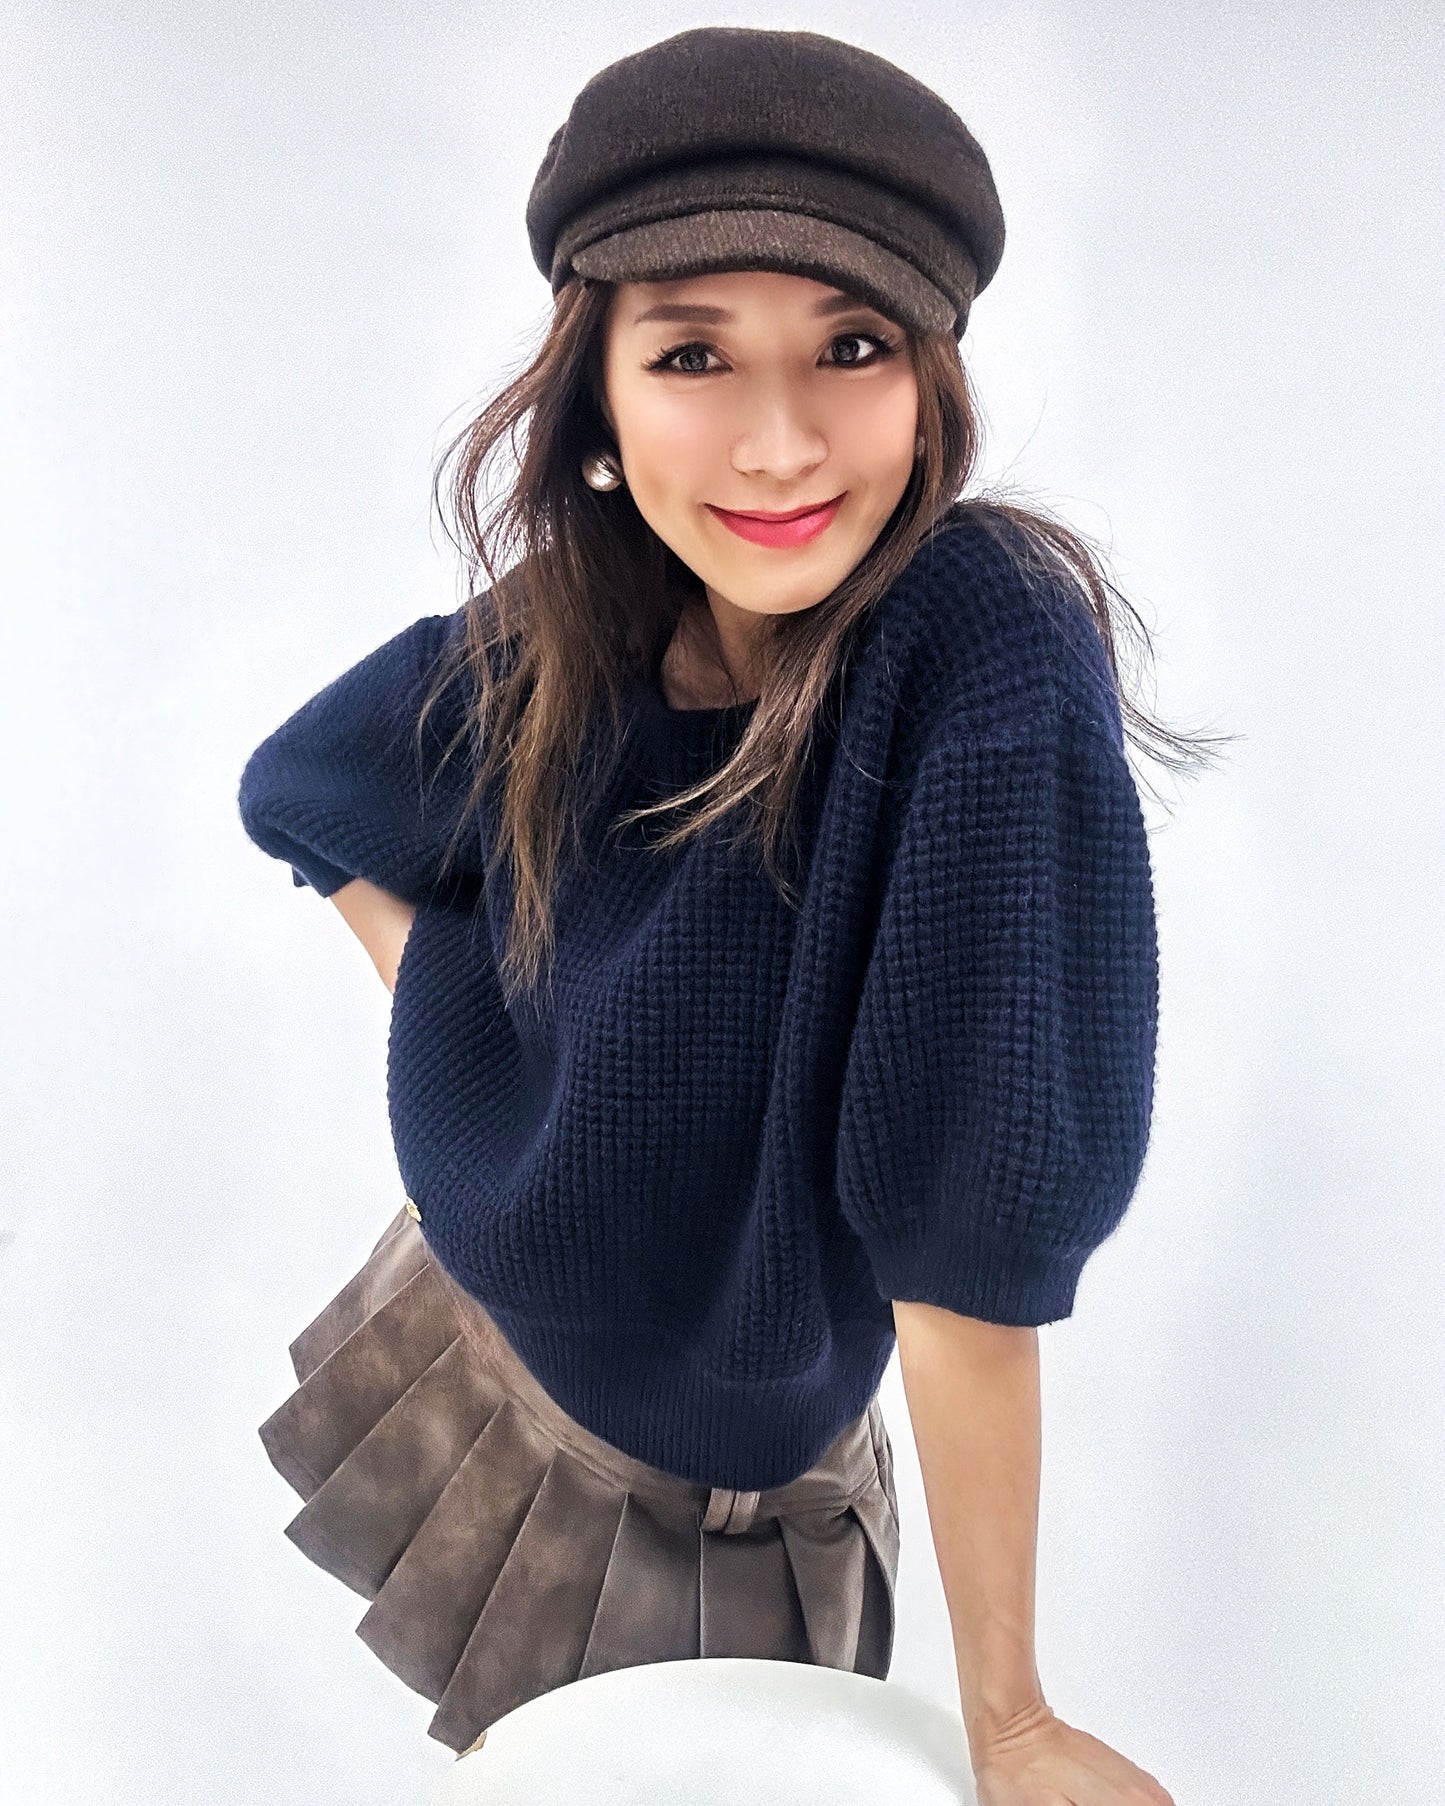 navy cashmere knitted top